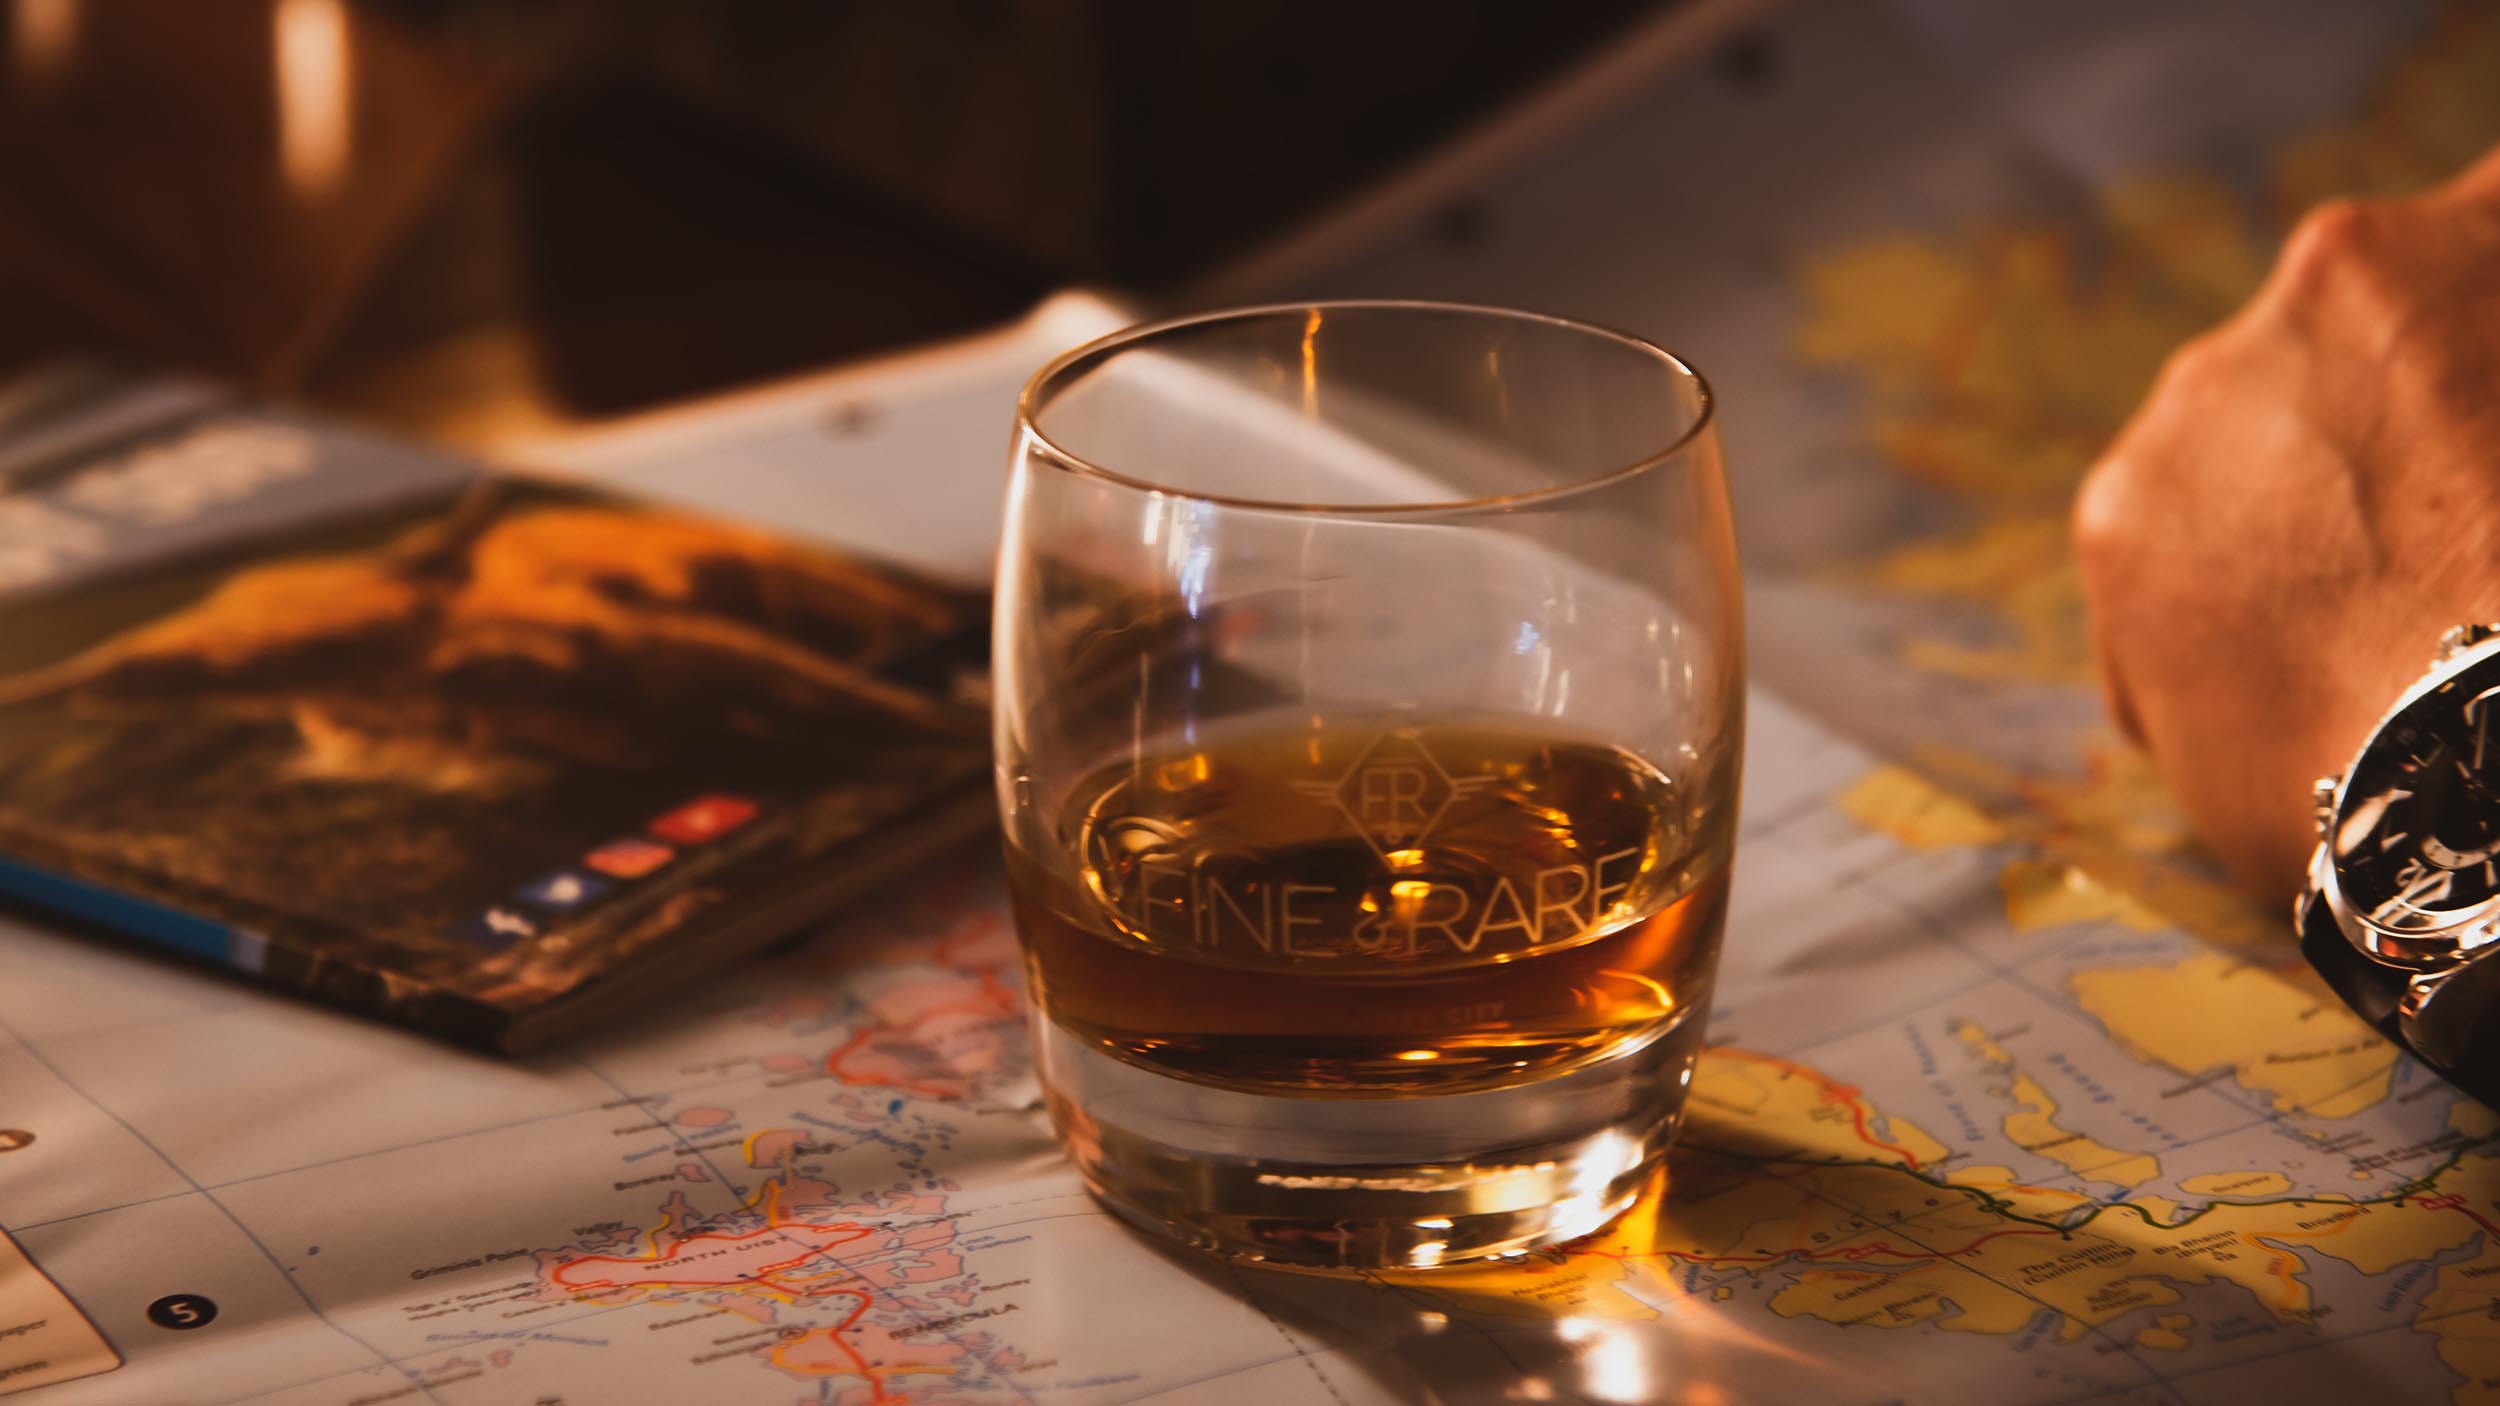 How To Analyze And Understand Rum: “The 7 Questions About Rum”